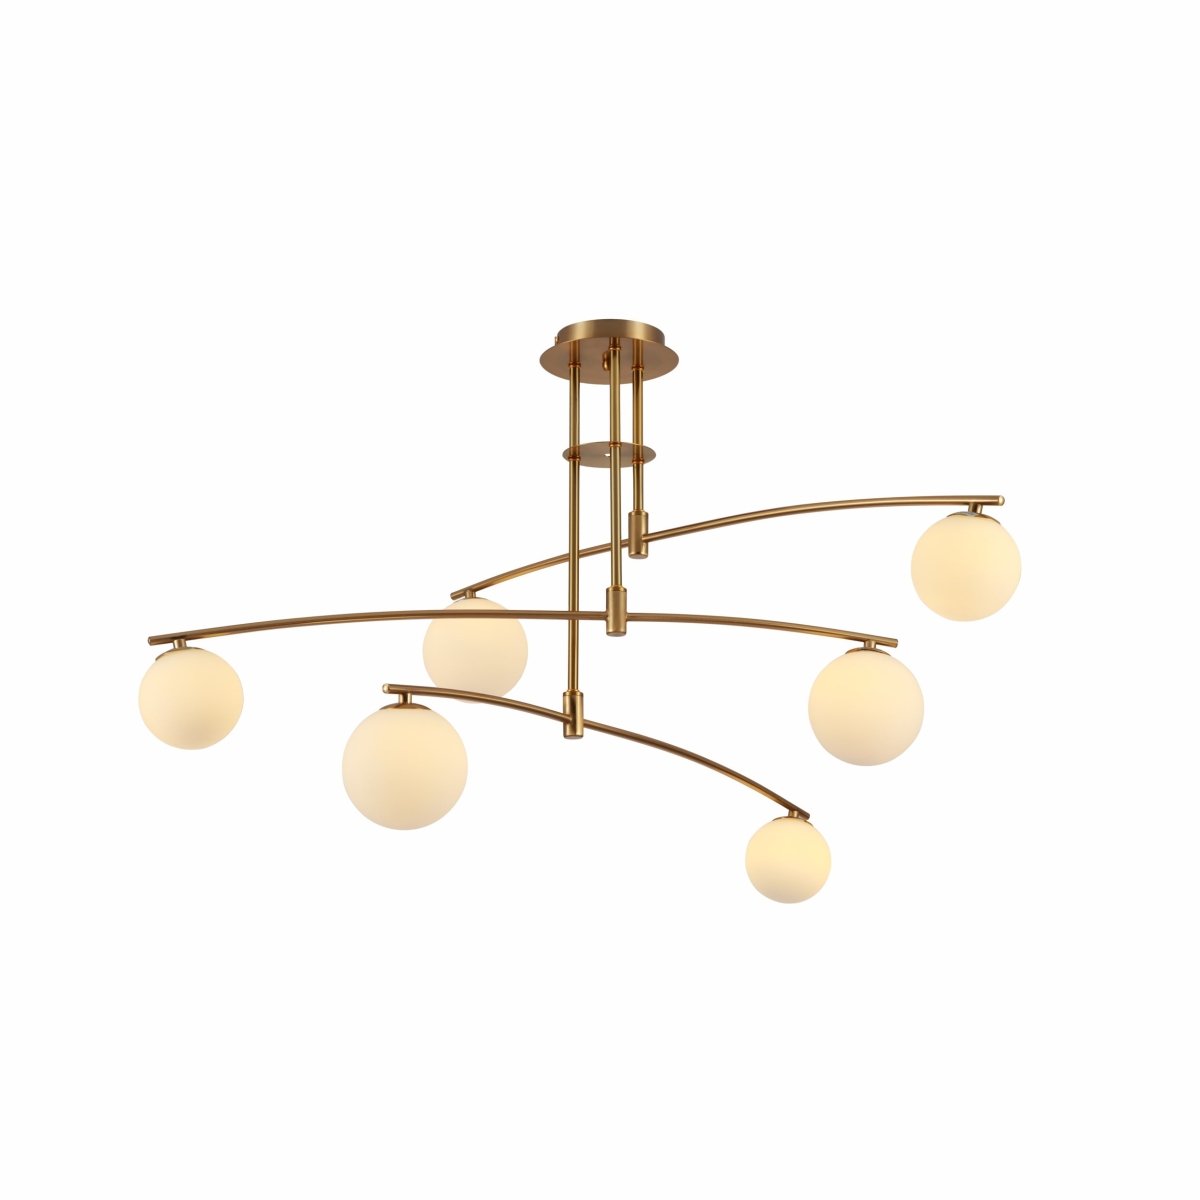 Main image of Balanced Palm Modern Chandelier with 6xG9 Fittings Opal Globes and Gold Body | TEKLED 159-17488